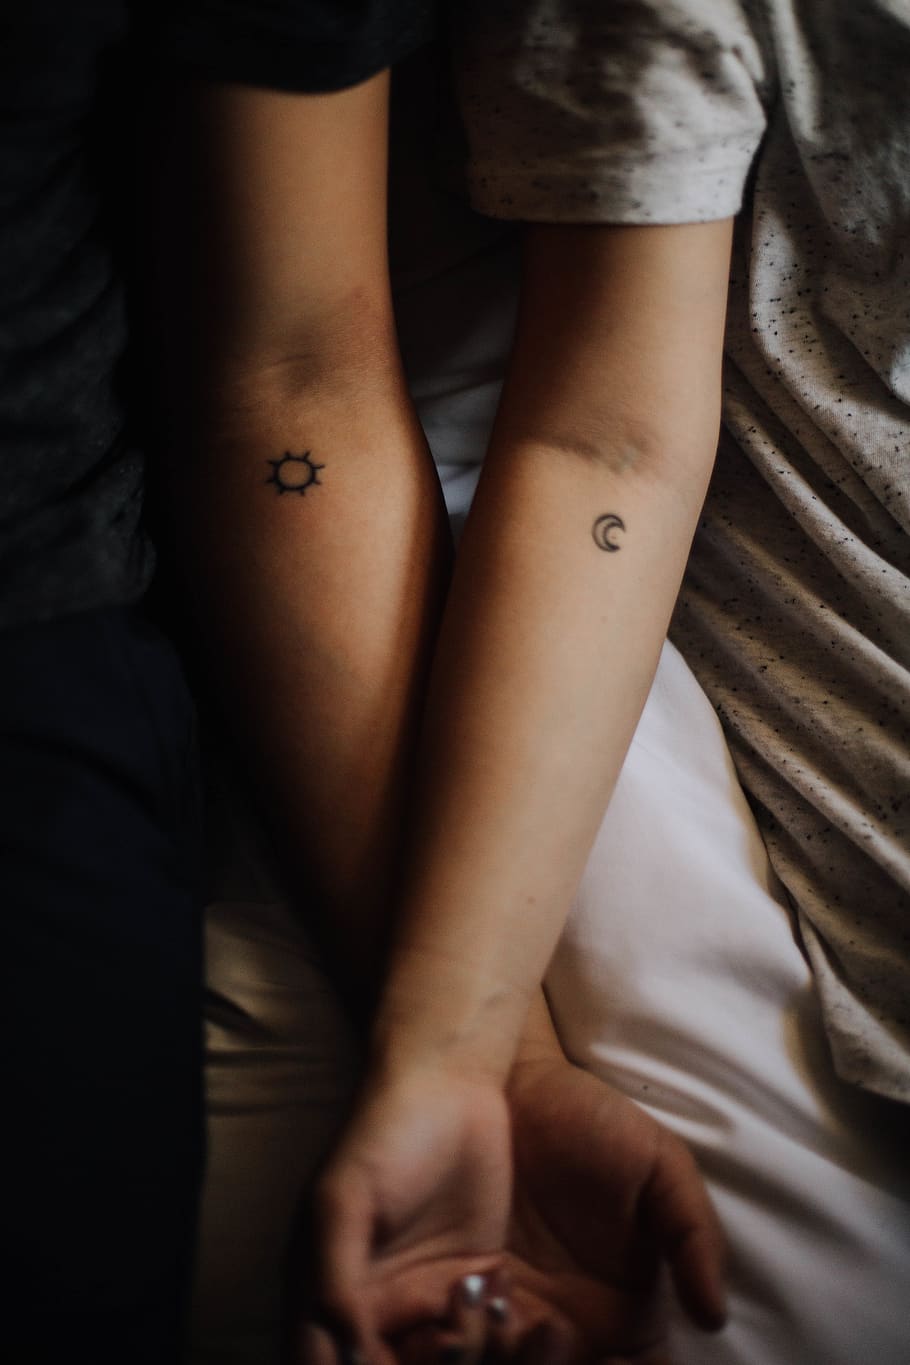 HD wallpaper: two persons showing their hand tattoos, human body part,  human hand | Wallpaper Flare